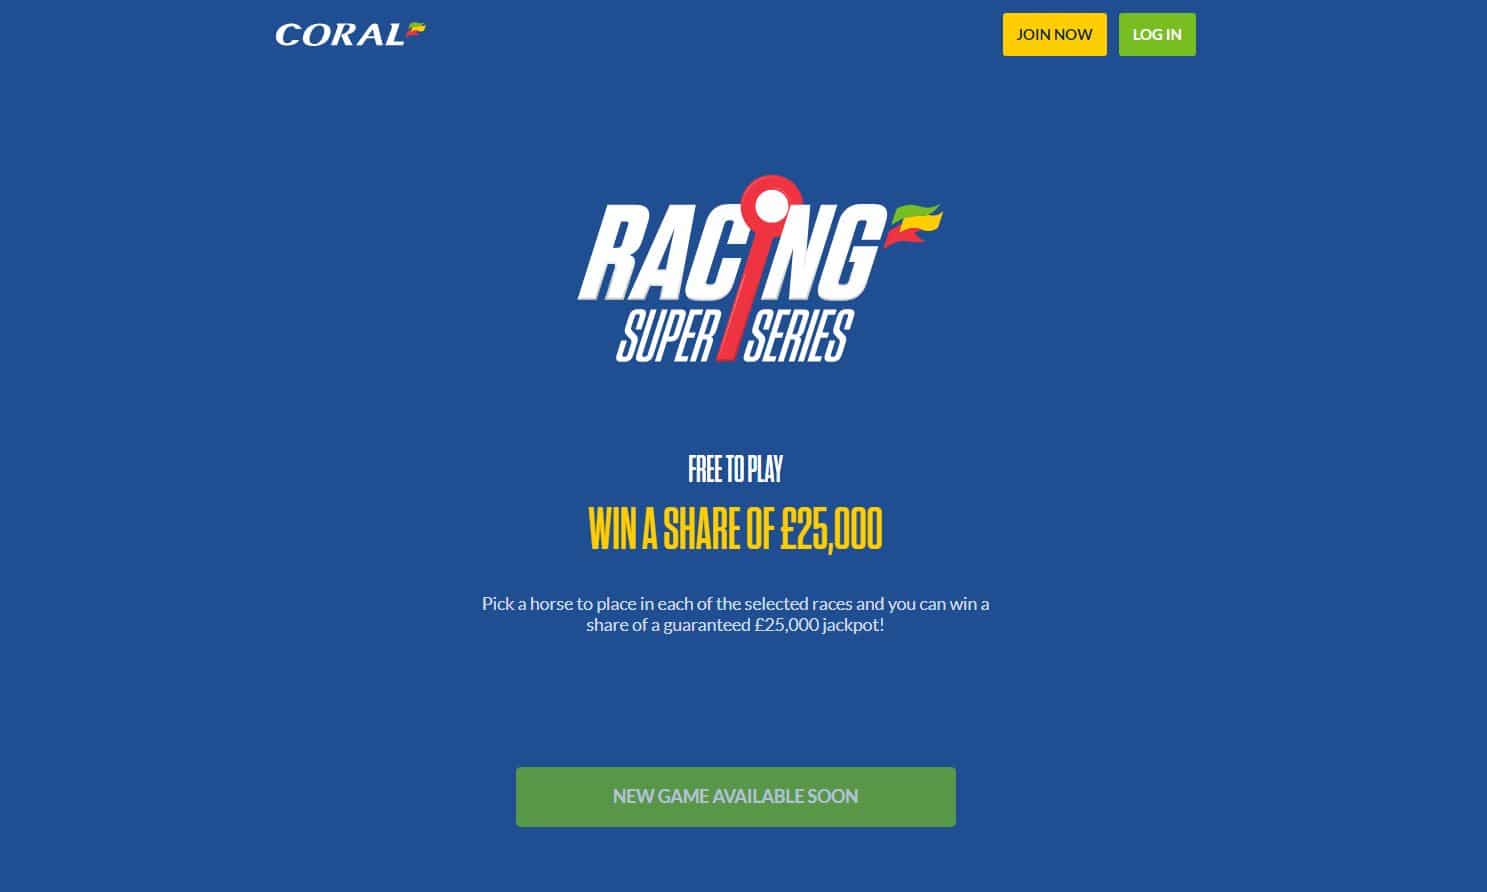 Coral Racing Super Series offer